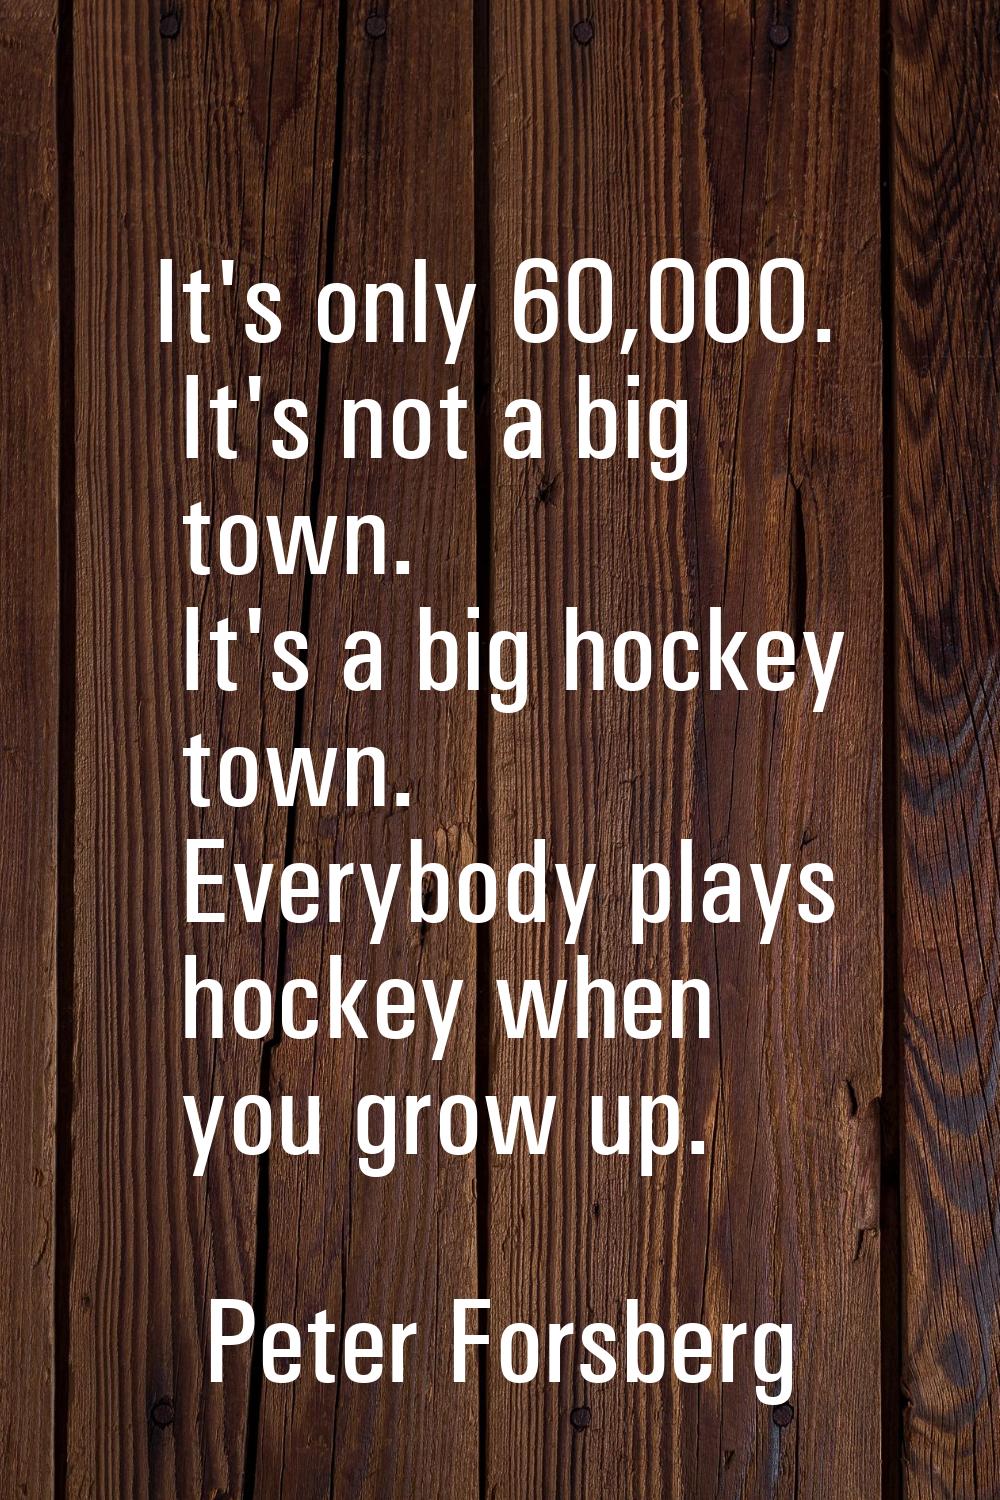 It's only 60,000. It's not a big town. It's a big hockey town. Everybody plays hockey when you grow